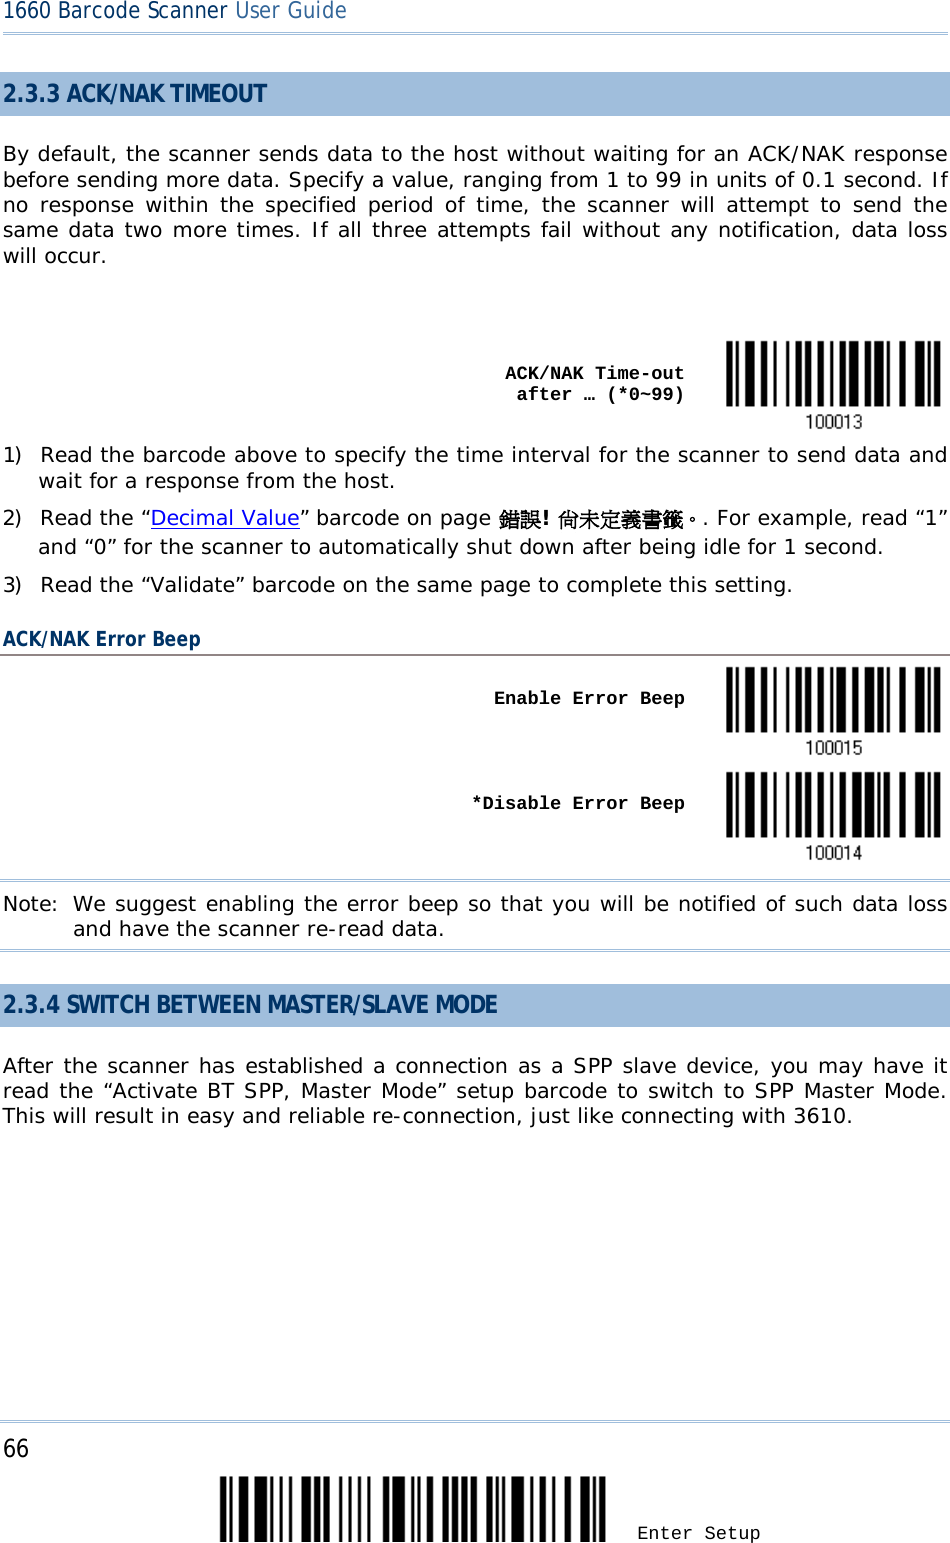 66 Enter Setup 1660 Barcode Scanner User Guide  2.3.3 ACK/NAK TIMEOUT By default, the scanner sends data to the host without waiting for an ACK/NAK response before sending more data. Specify a value, ranging from 1 to 99 in units of 0.1 second. If no response within the specified period of time, the scanner will attempt to send the same data two more times. If all three attempts fail without any notification, data loss will occur.     ACK/NAK Time-out after … (*0~99)  1) Read the barcode above to specify the time interval for the scanner to send data and wait for a response from the host.       2) Read the “Decimal Value” barcode on page 錯誤! 尚未定義書籤。. For example, read “1” and “0” for the scanner to automatically shut down after being idle for 1 second.  3) Read the “Validate” barcode on the same page to complete this setting. ACK/NAK Error Beep    Enable Error Beep       *Disable Error Beep  Note: We suggest enabling the error beep so that you will be notified of such data loss and have the scanner re-read data. 2.3.4 SWITCH BETWEEN MASTER/SLAVE MODE After the scanner has established a connection as a SPP slave device, you may have it read the “Activate BT SPP, Master Mode” setup barcode to switch to SPP Master Mode. This will result in easy and reliable re-connection, just like connecting with 3610.     